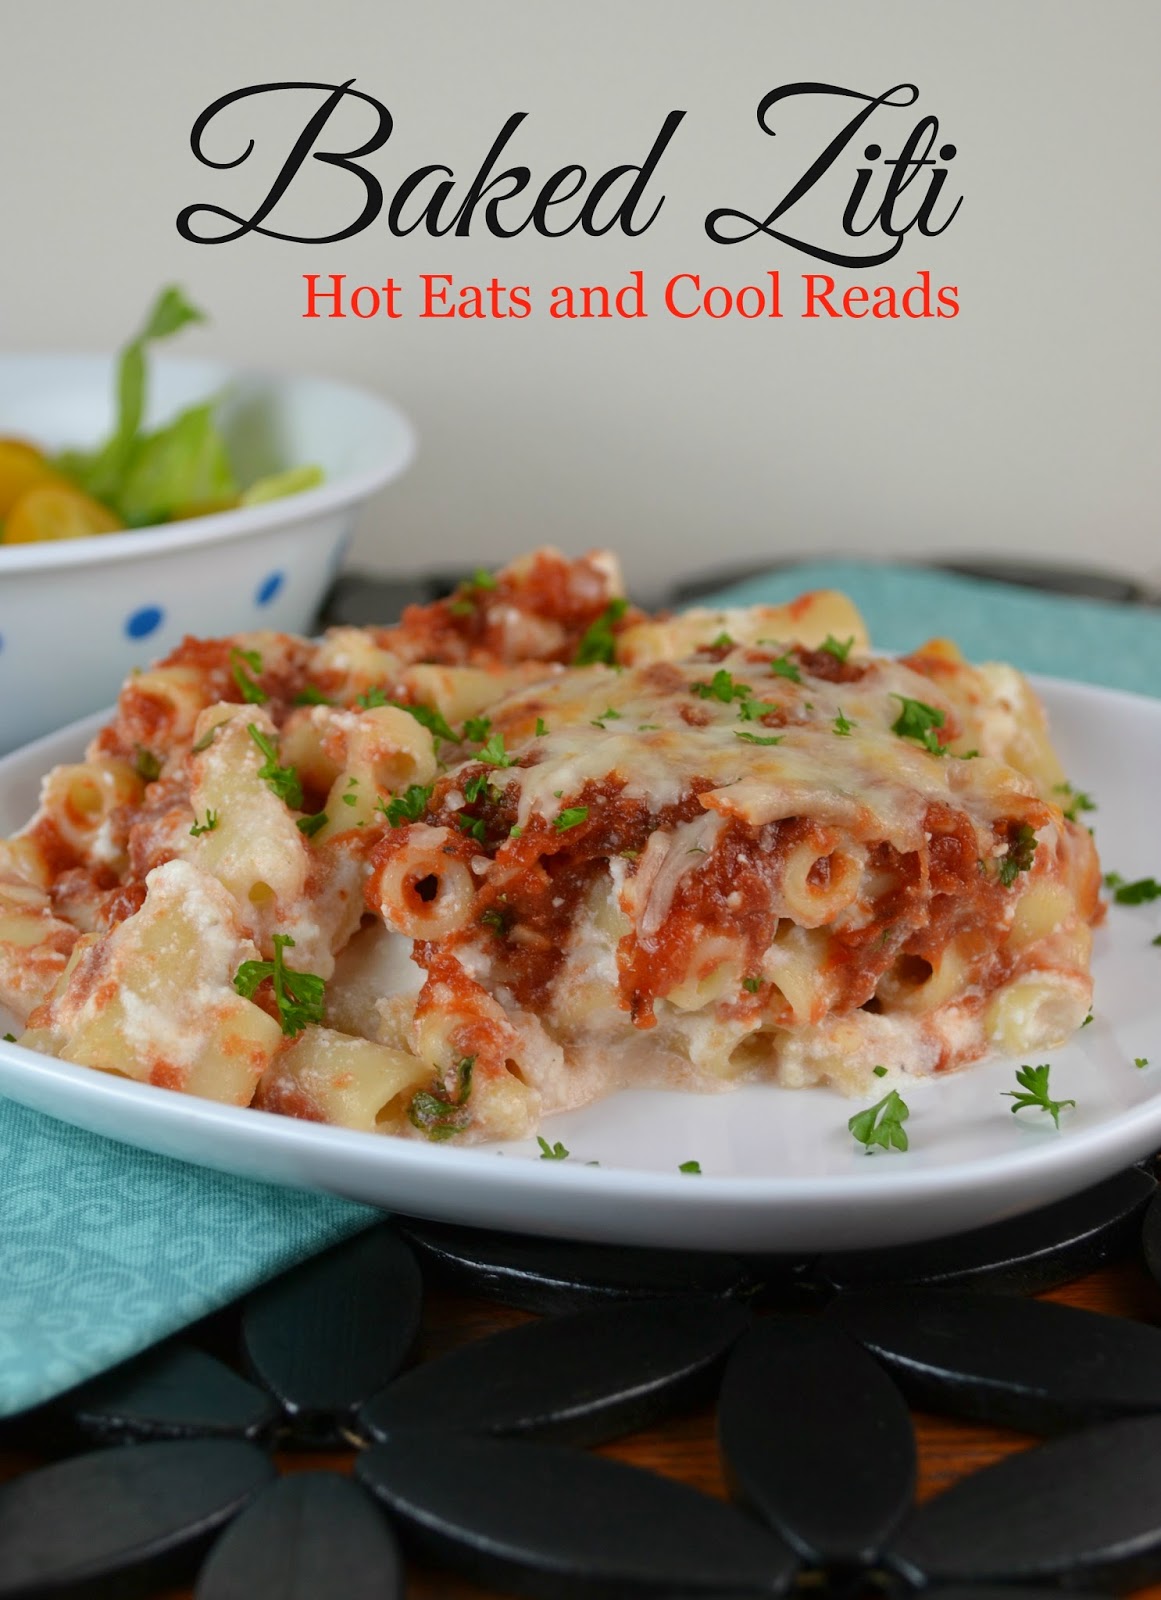 Classic Italian Dinner with served with some salad and bread! Baked Ziti with Homemade Sauce from Hot Eats and Cool Reads!